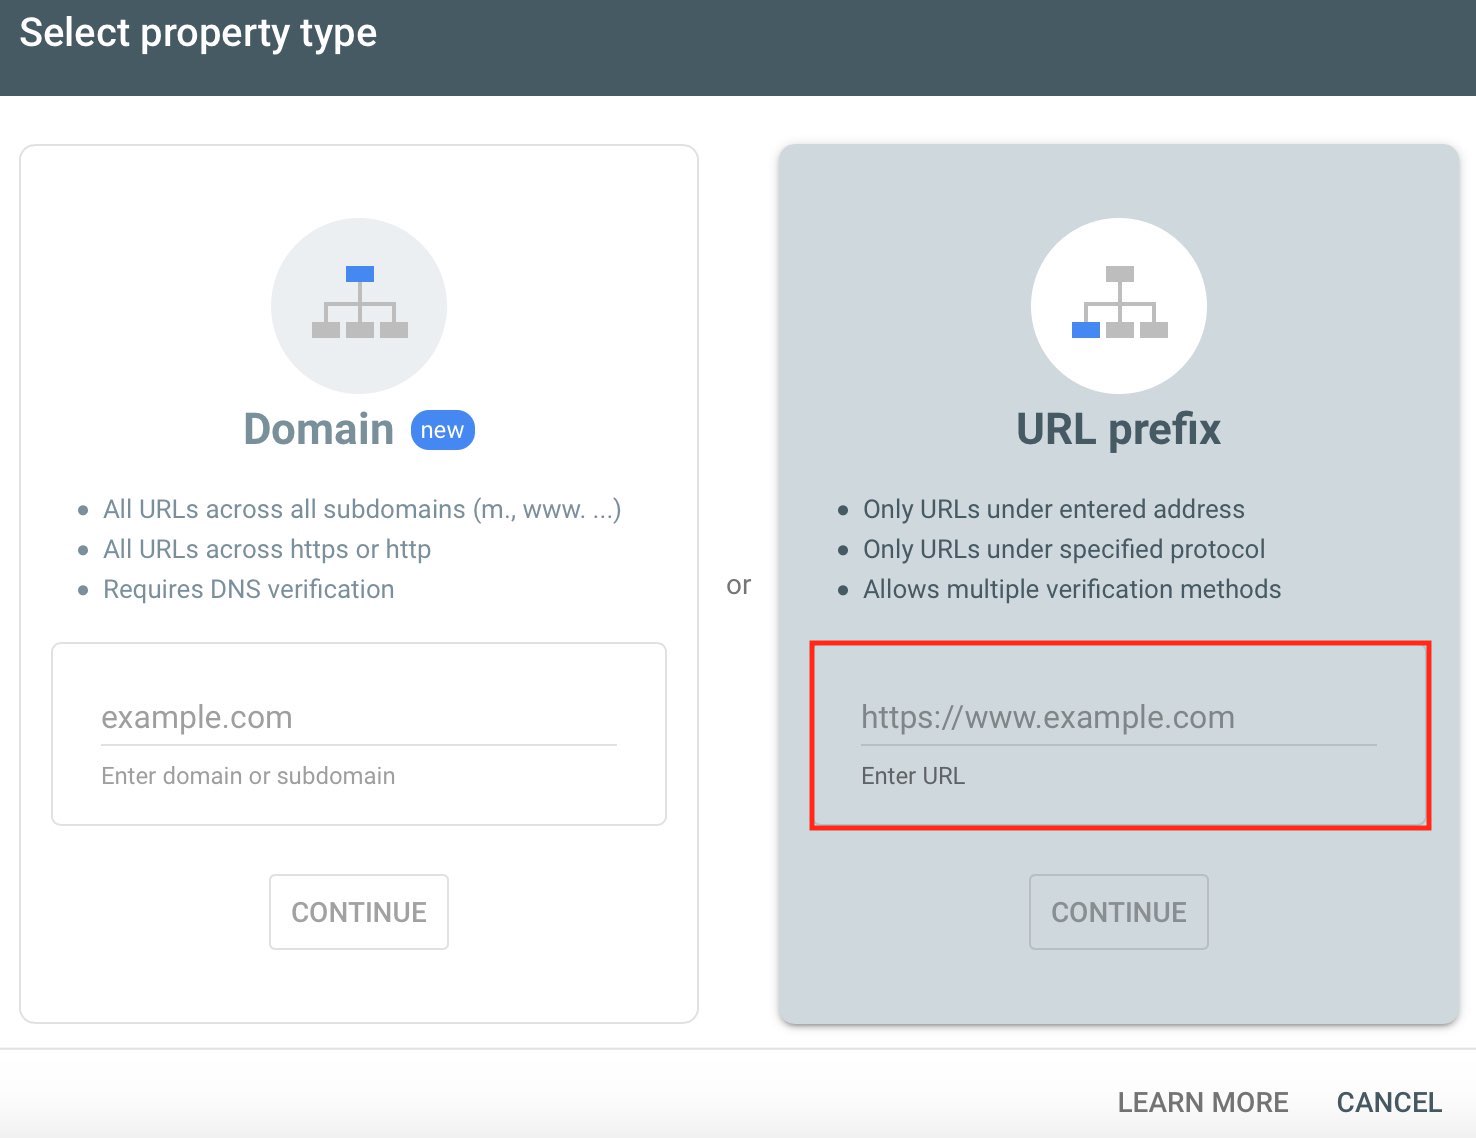 Google Search Console Property